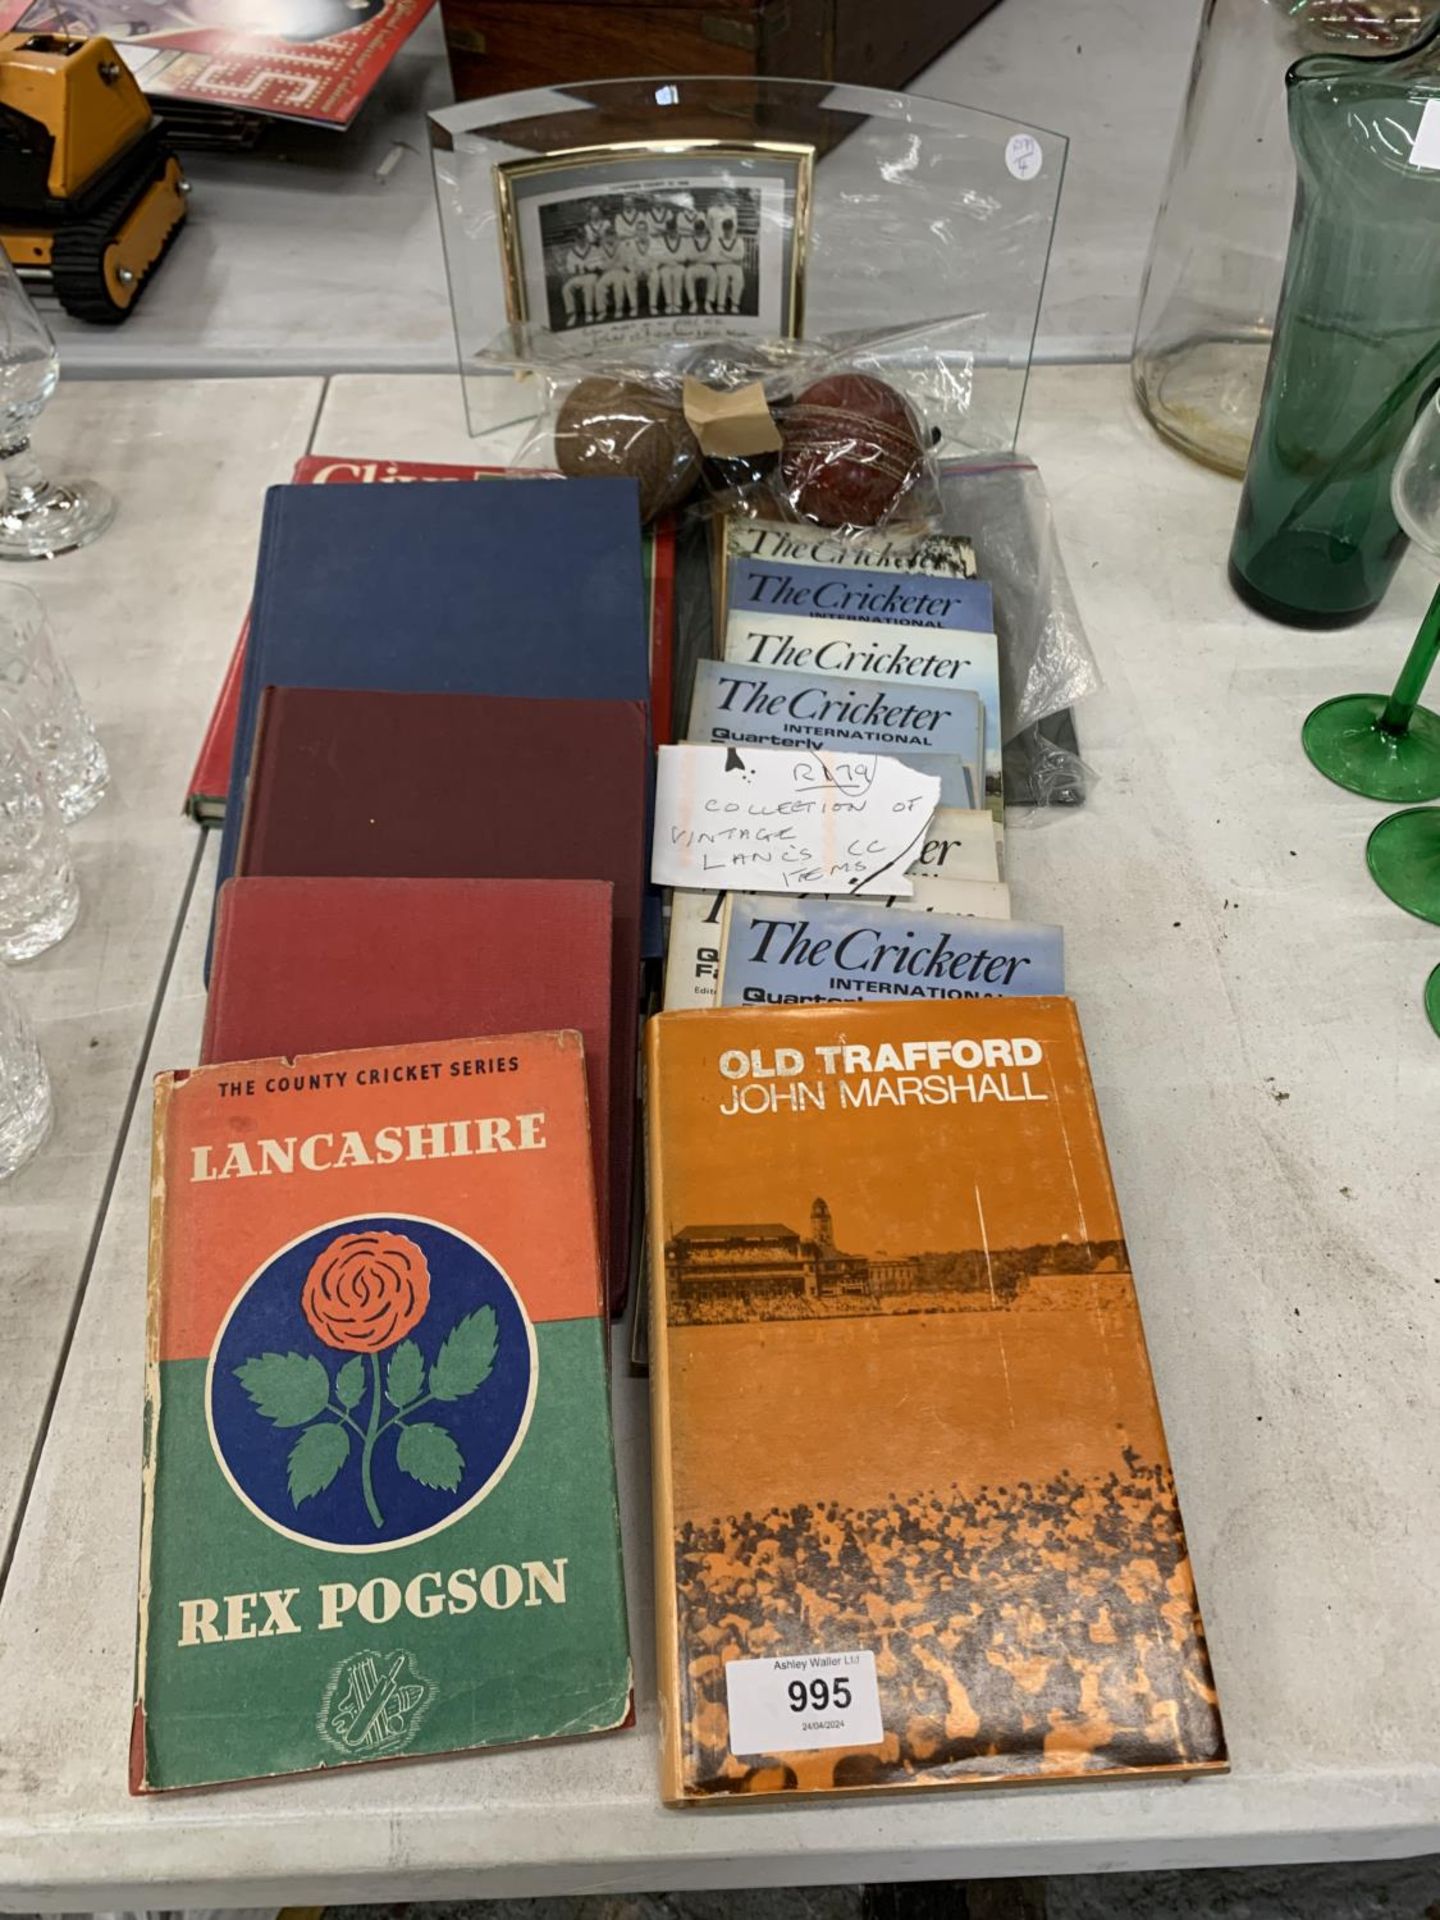 A COLLECTION OF VINTAGE LANCASHIRE CRICKET CLUB ITEMS TO INCLUDE BOOKS, A SIGNED 1948 PHOTO AND